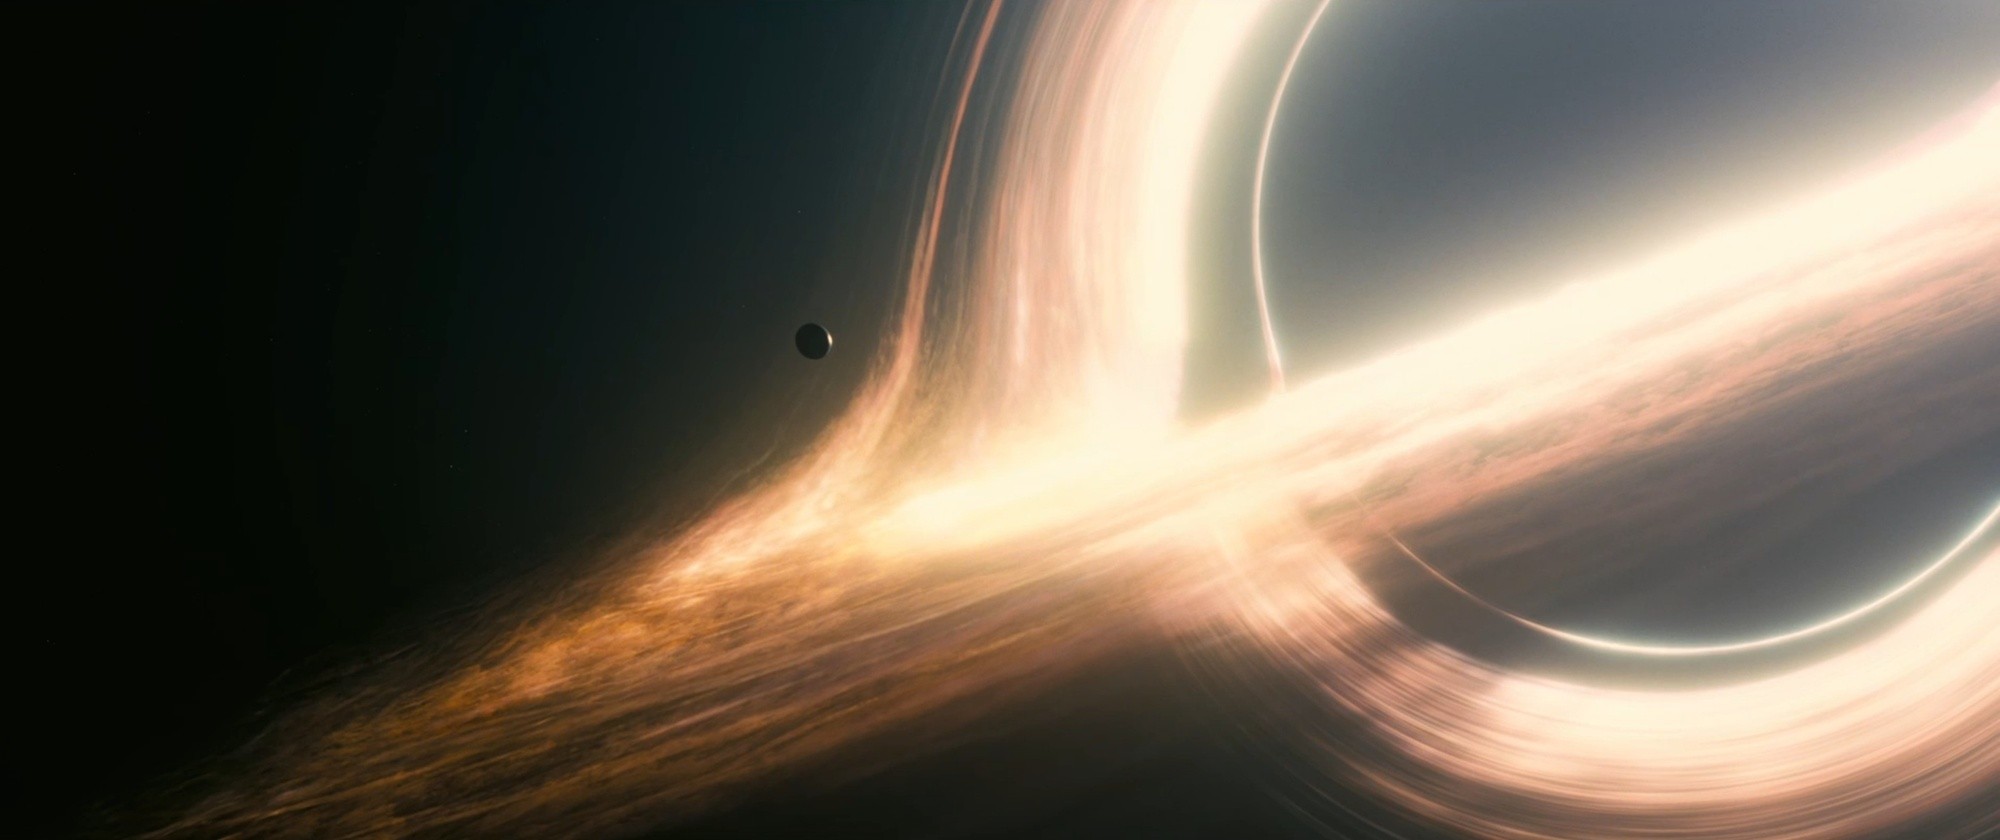 A scene from Paramount Pictures' Interstellar (2014)